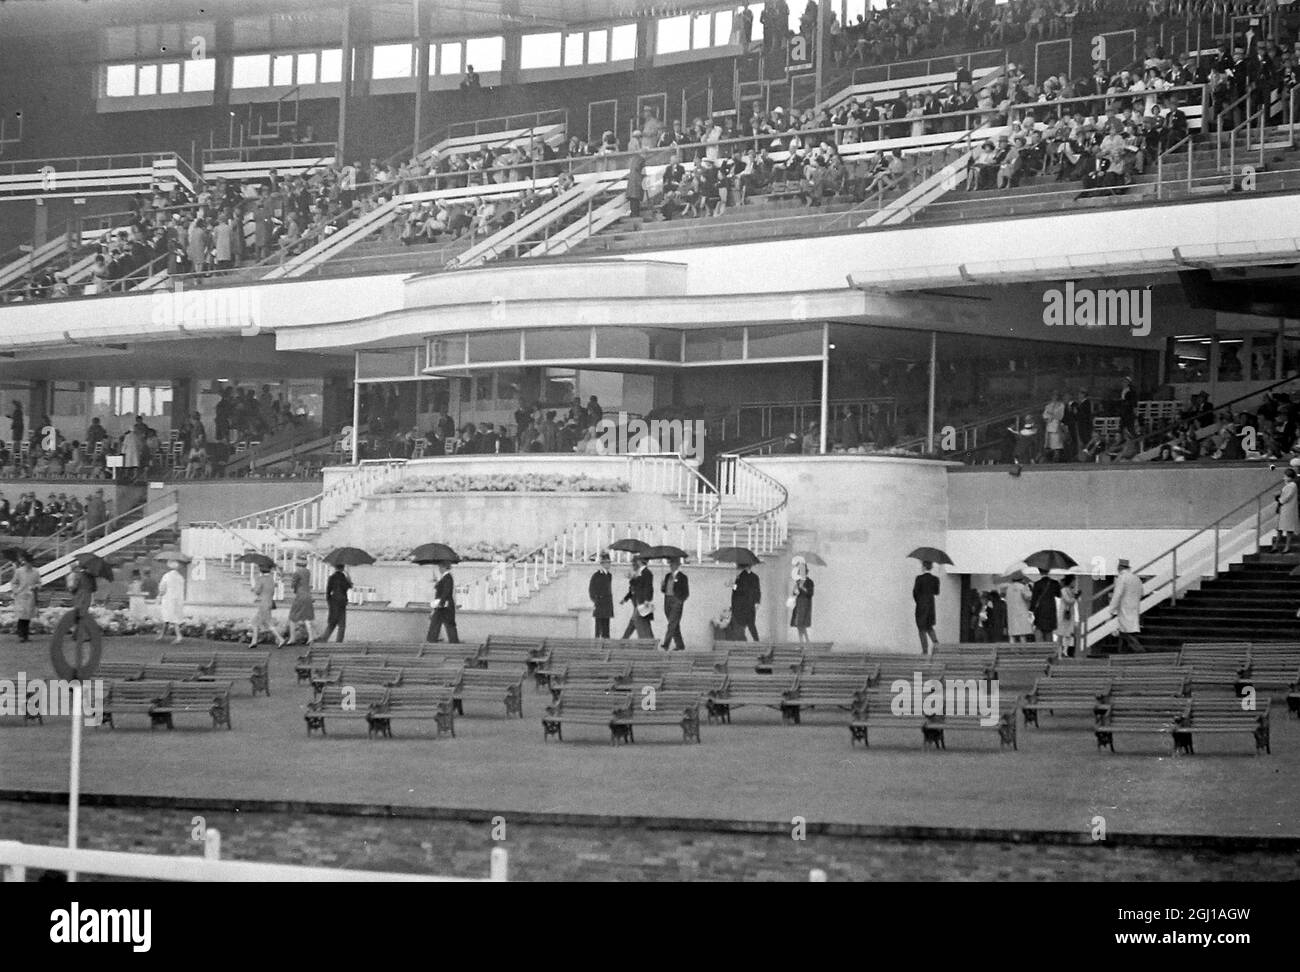 HORSE RACING ROYAL ASCOT RACE GOERS REMAIN AFTER RACING CANCELLED  ;  18 JUNE 1964 Stock Photo